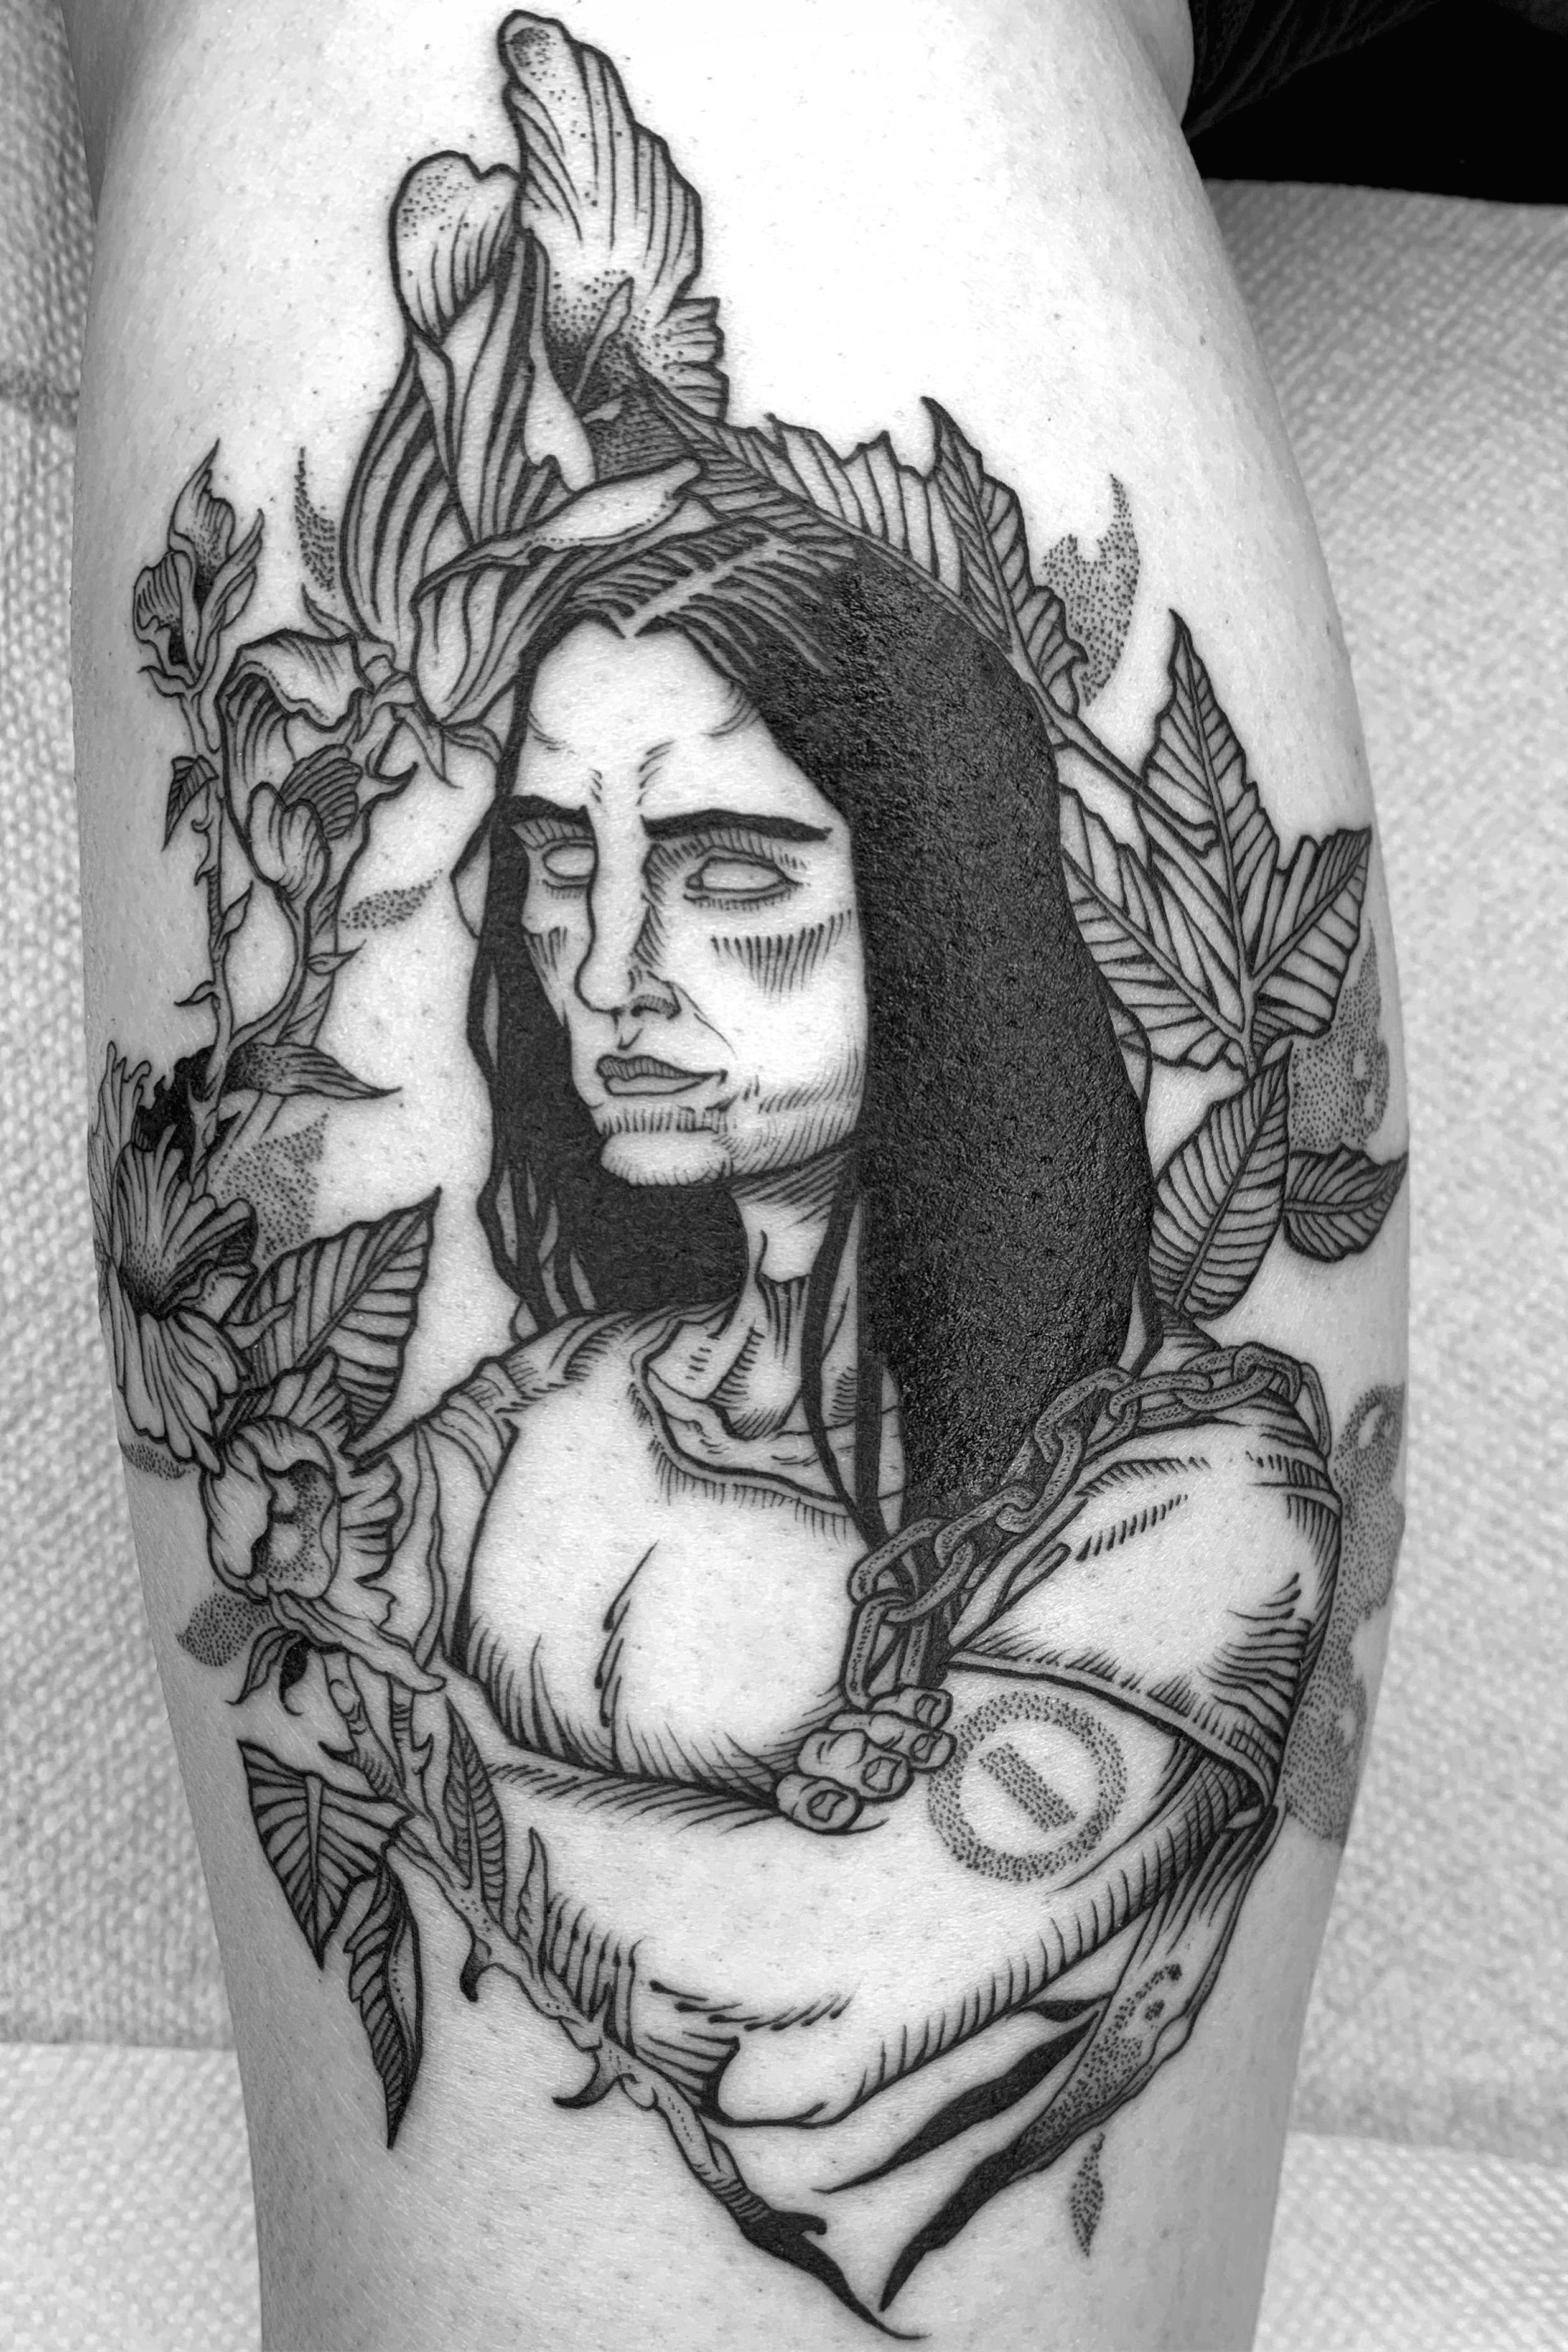 A different Satanic tattoo I got this the year after Peter Steele died  His music was and is a major part of my aesthetics  rsatanism